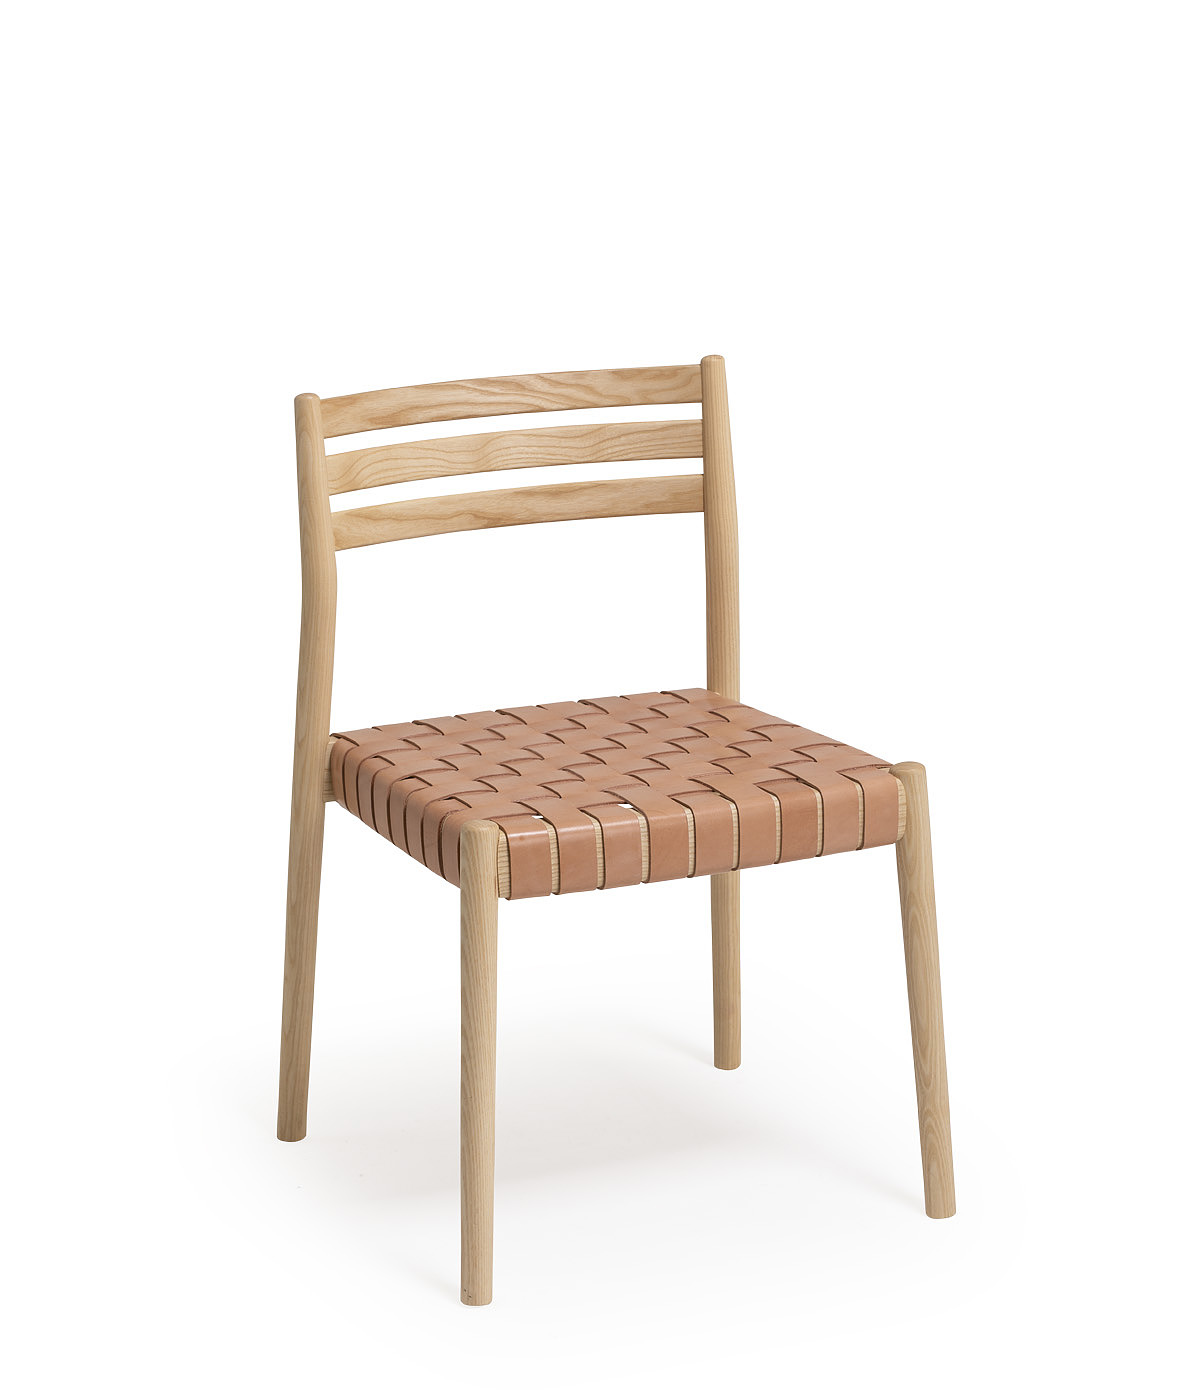 Bogart chair with woven cord seat - Vergés